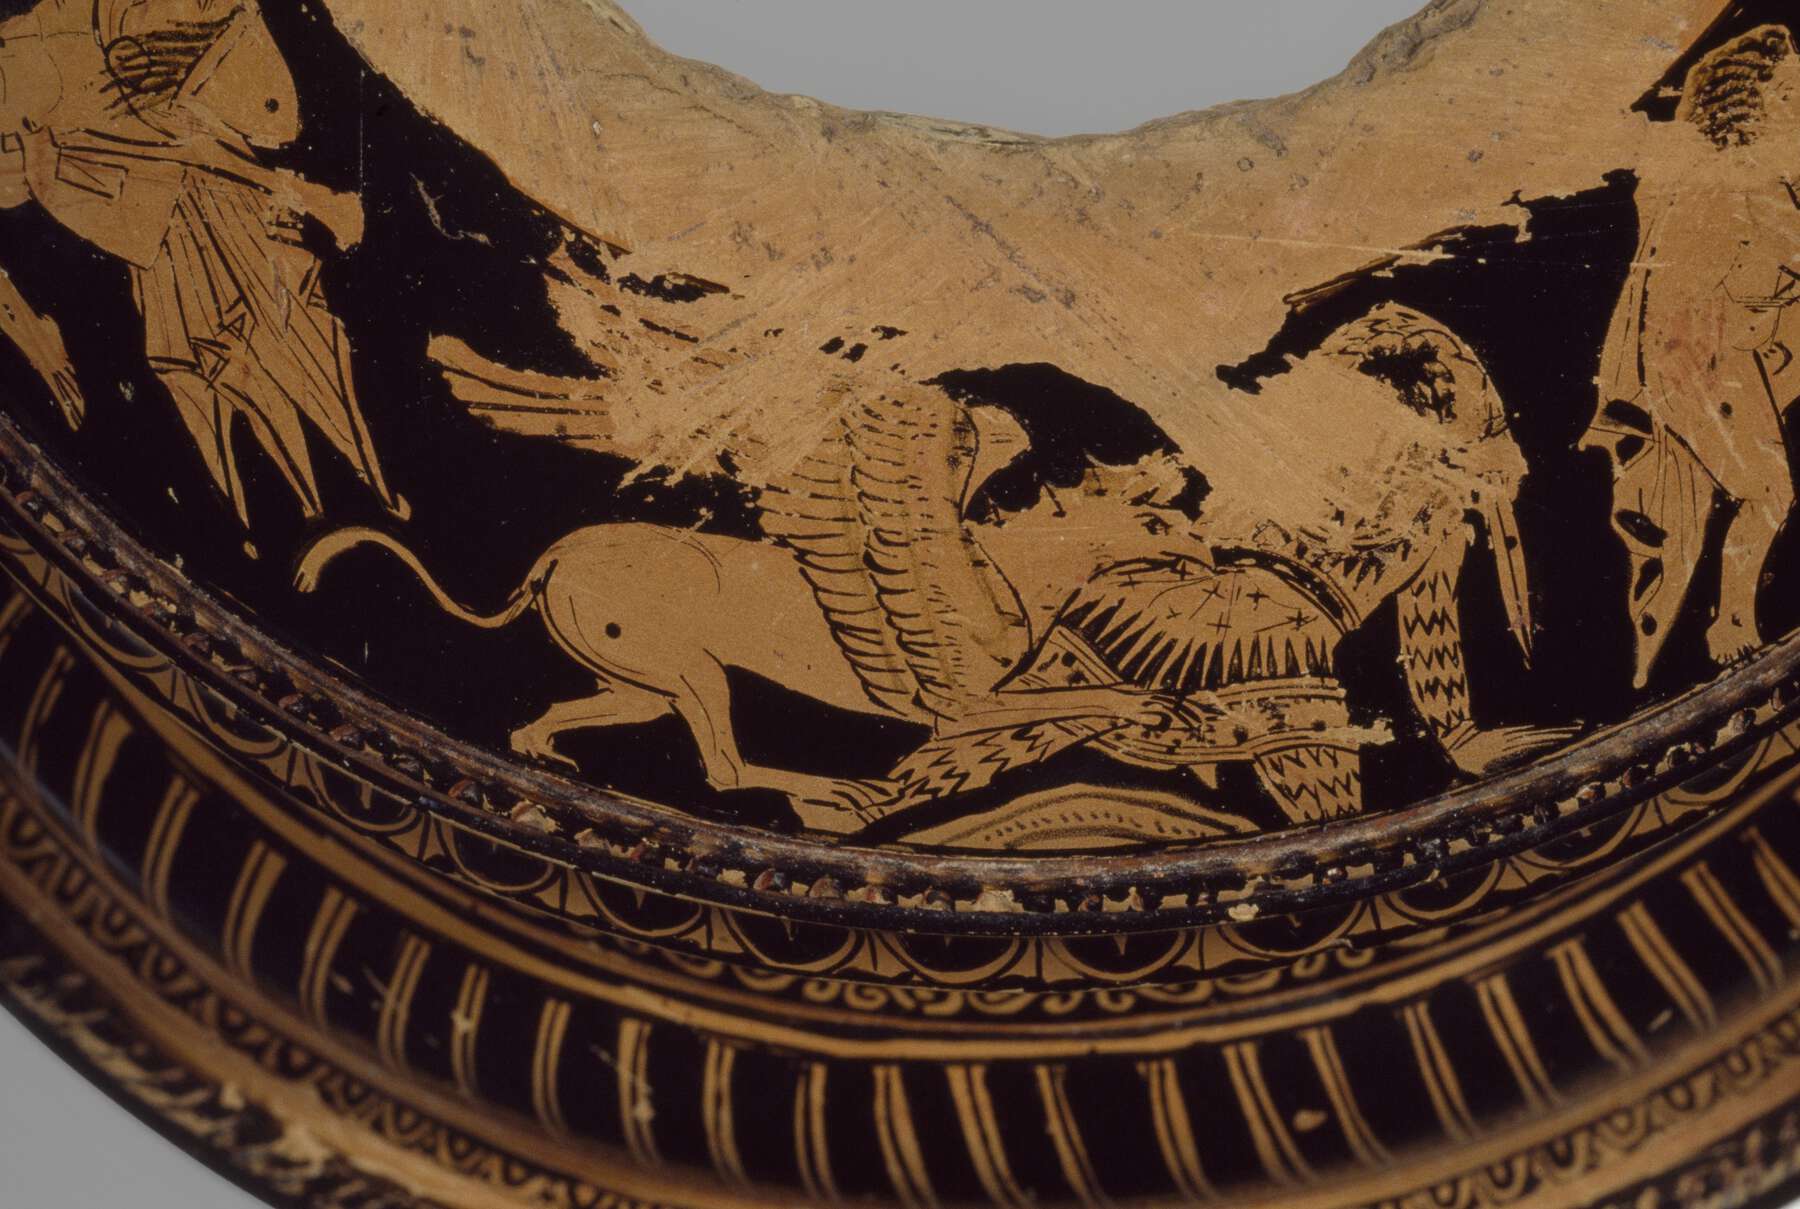 Another detail of the top of the foot, showing what looks like a griffin with its head lunging toward a person on the ground